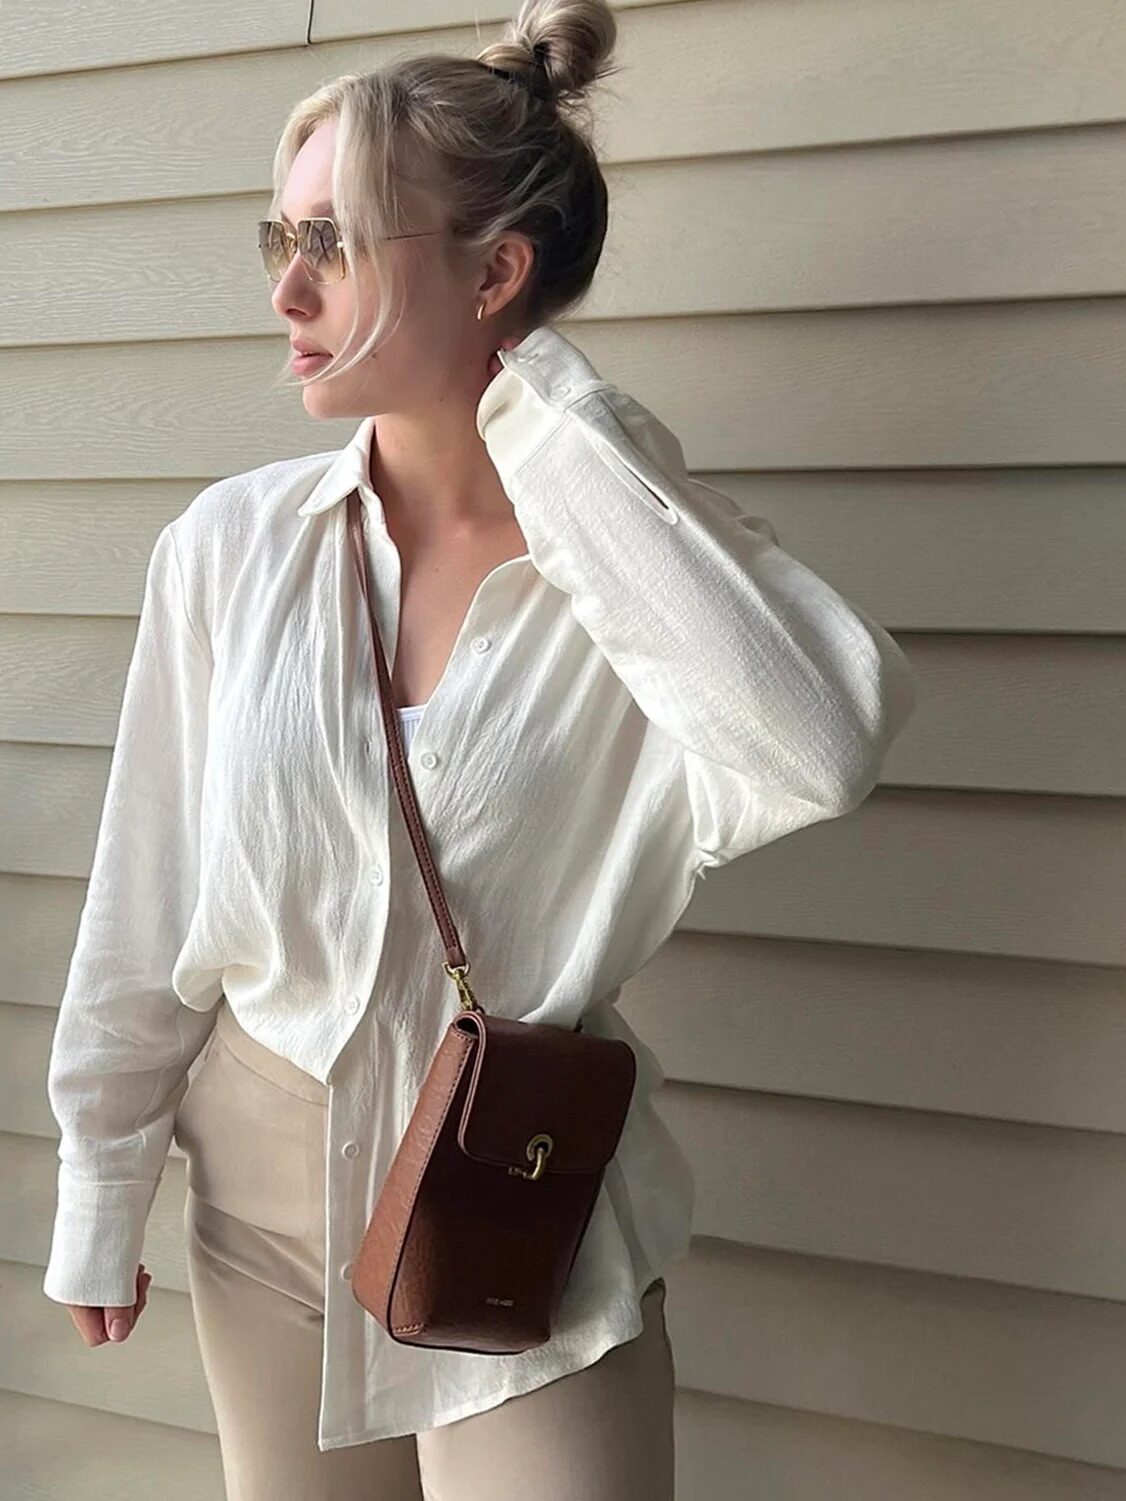 Woman in a white shirt and sunglasses posing with a small brown shoulder bag.